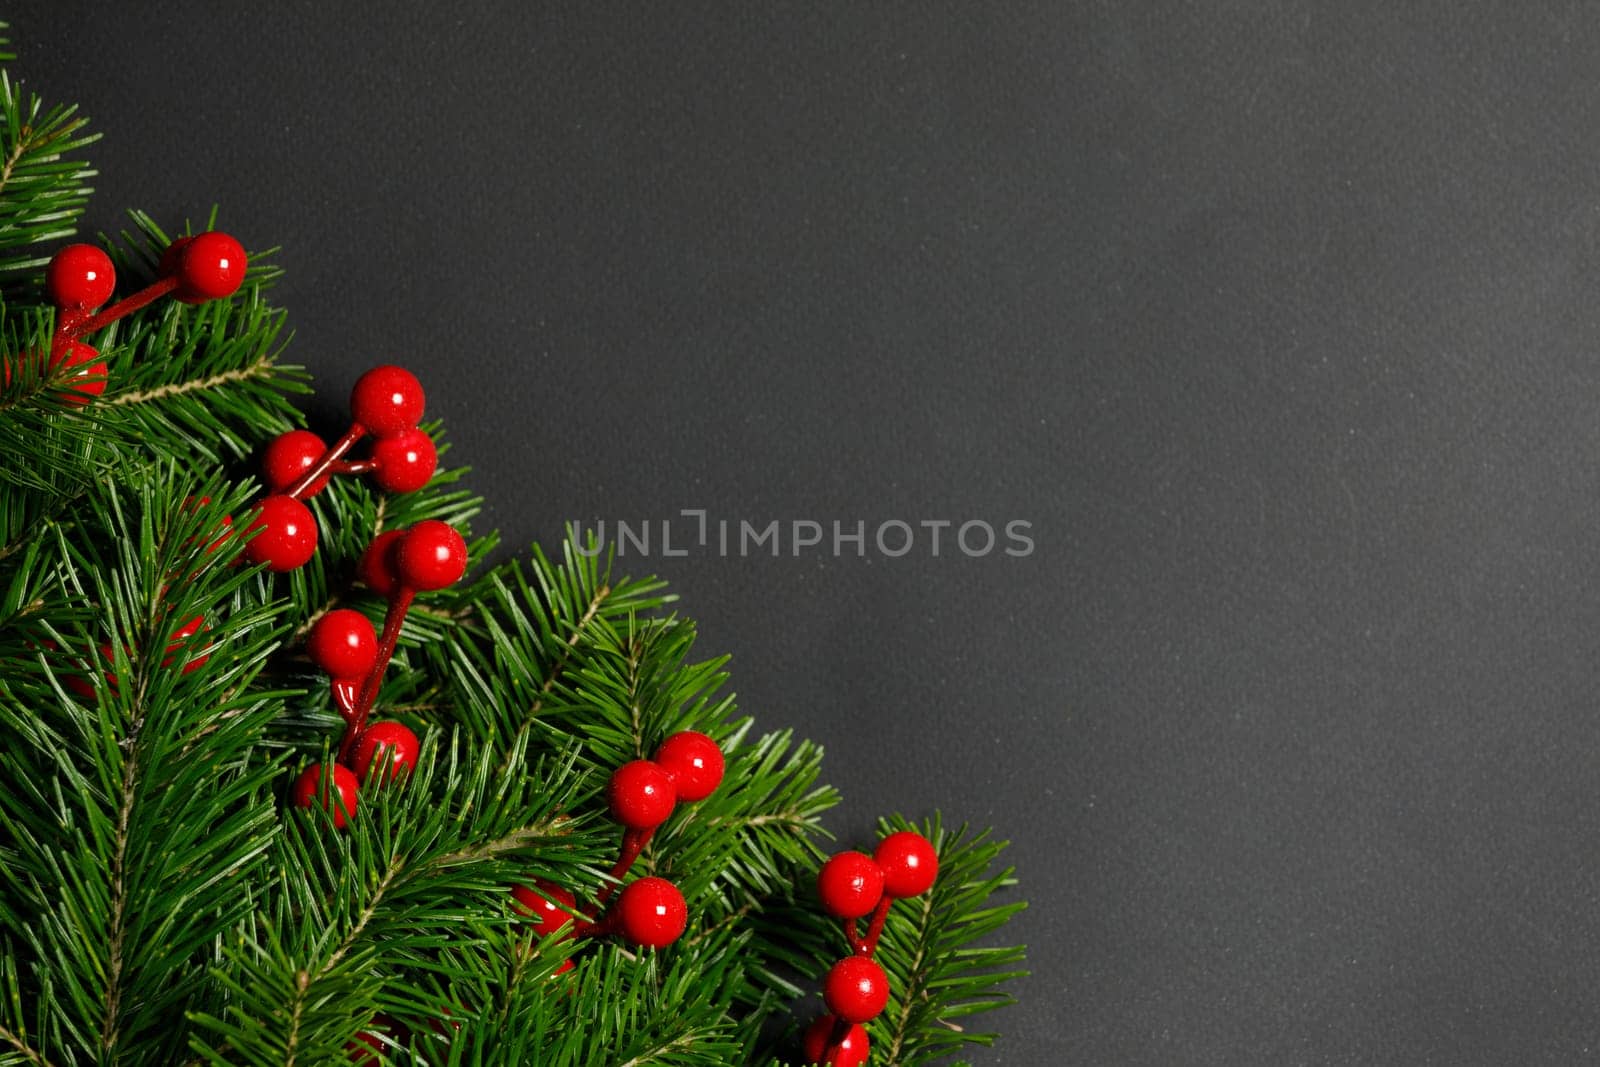 Pine branches decor on black paper by Yellowj